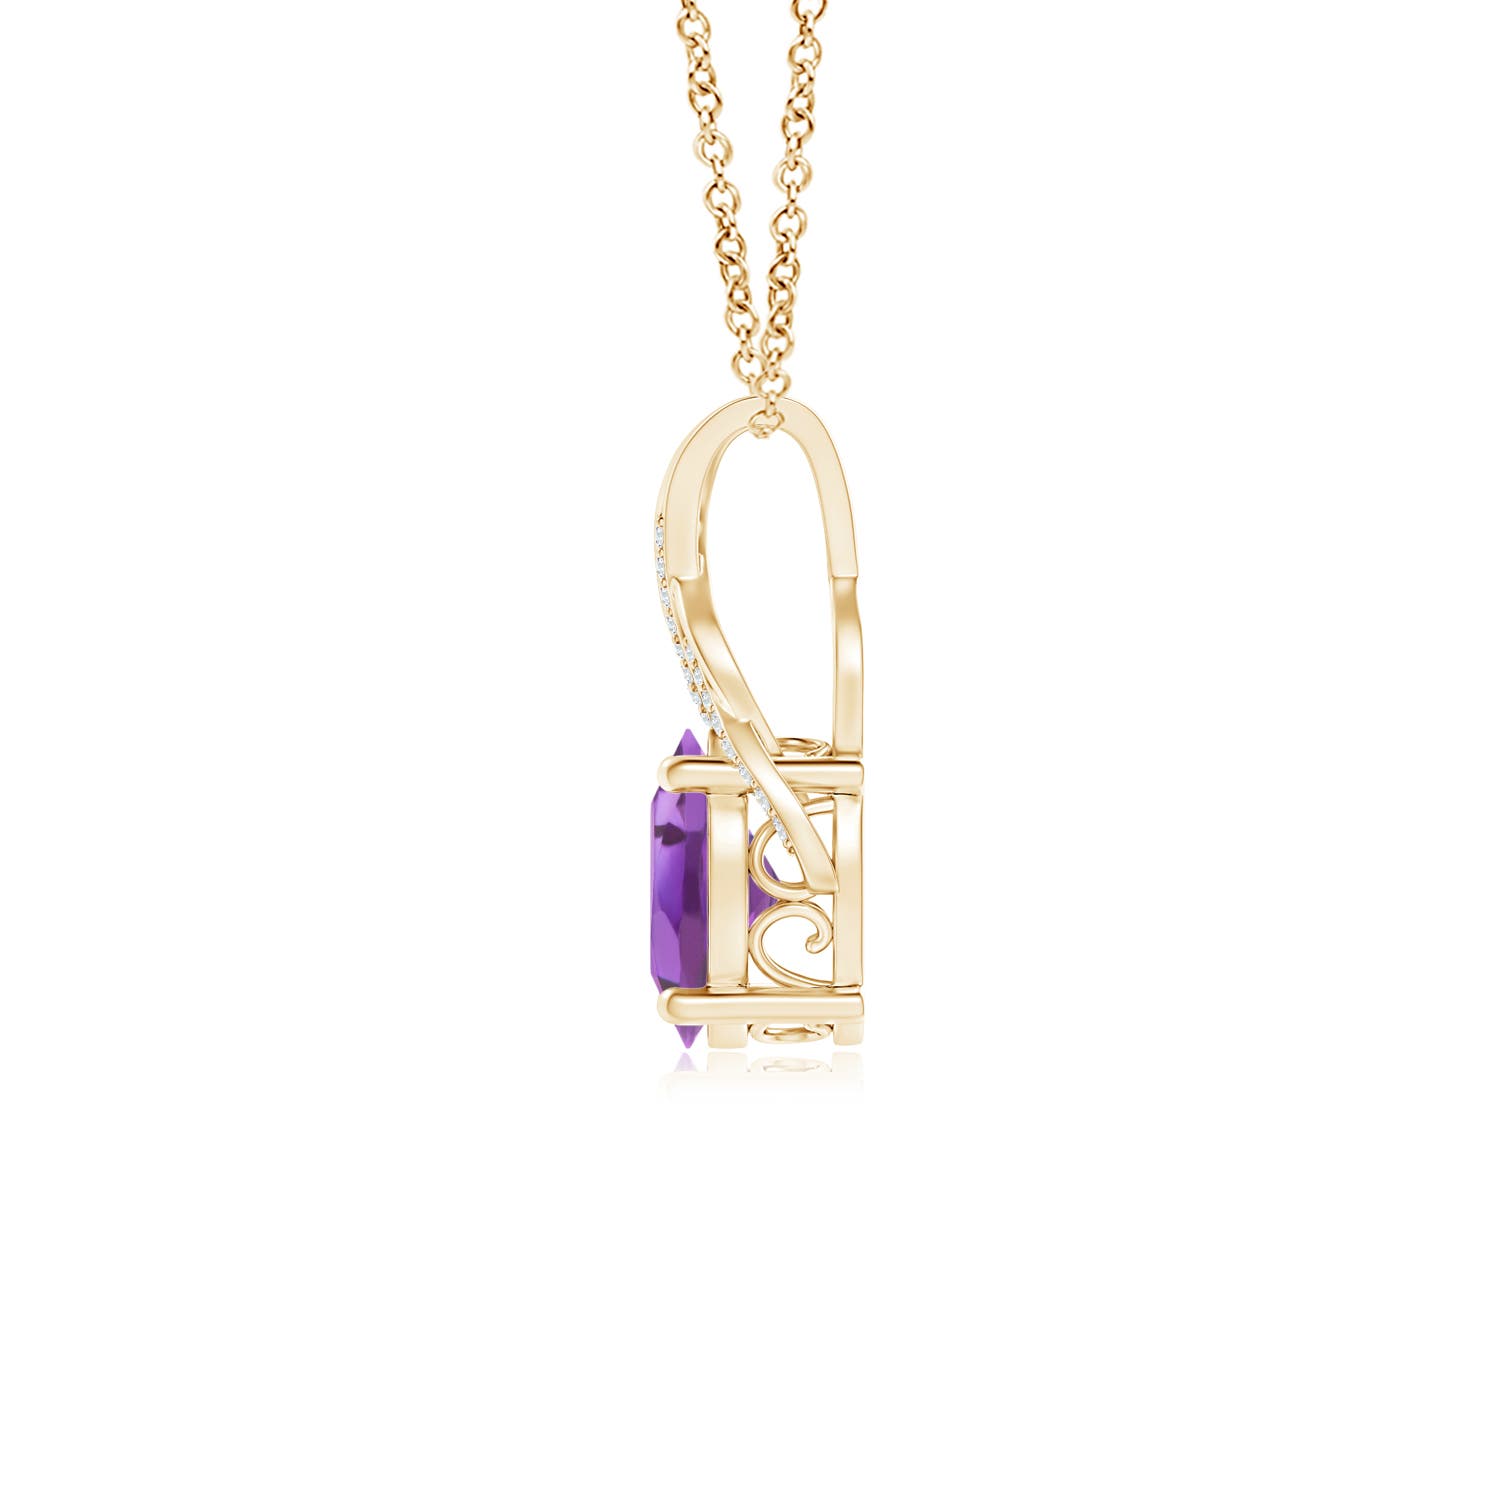 A - Amethyst / 2.35 CT / 14 KT Yellow Gold